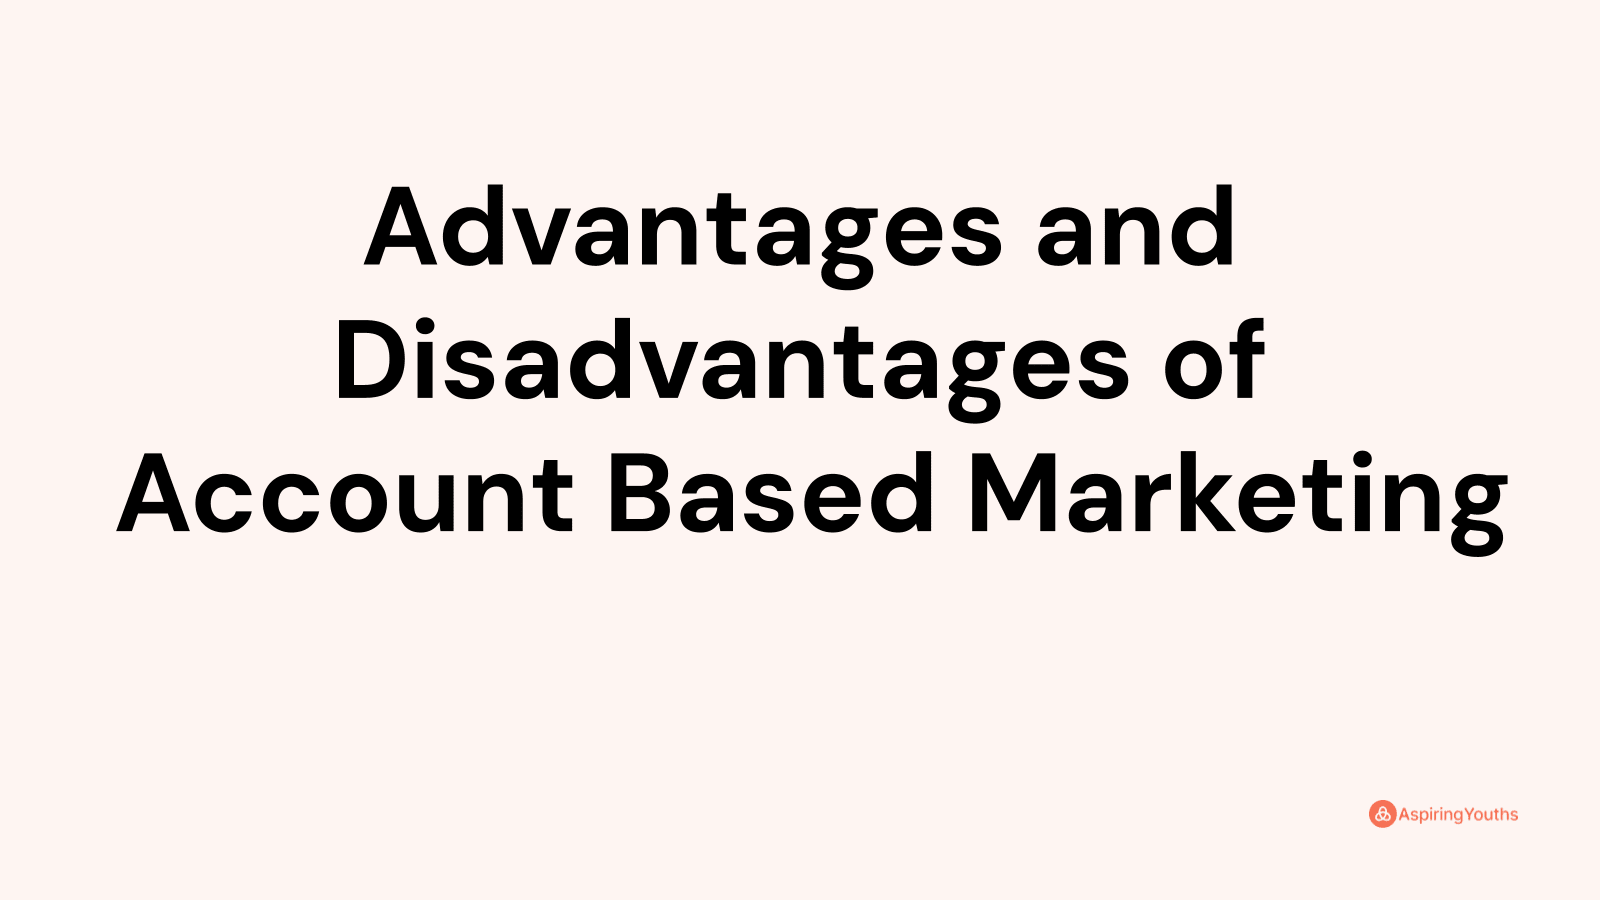 Advantages and disadvantages of Account Based Marketing